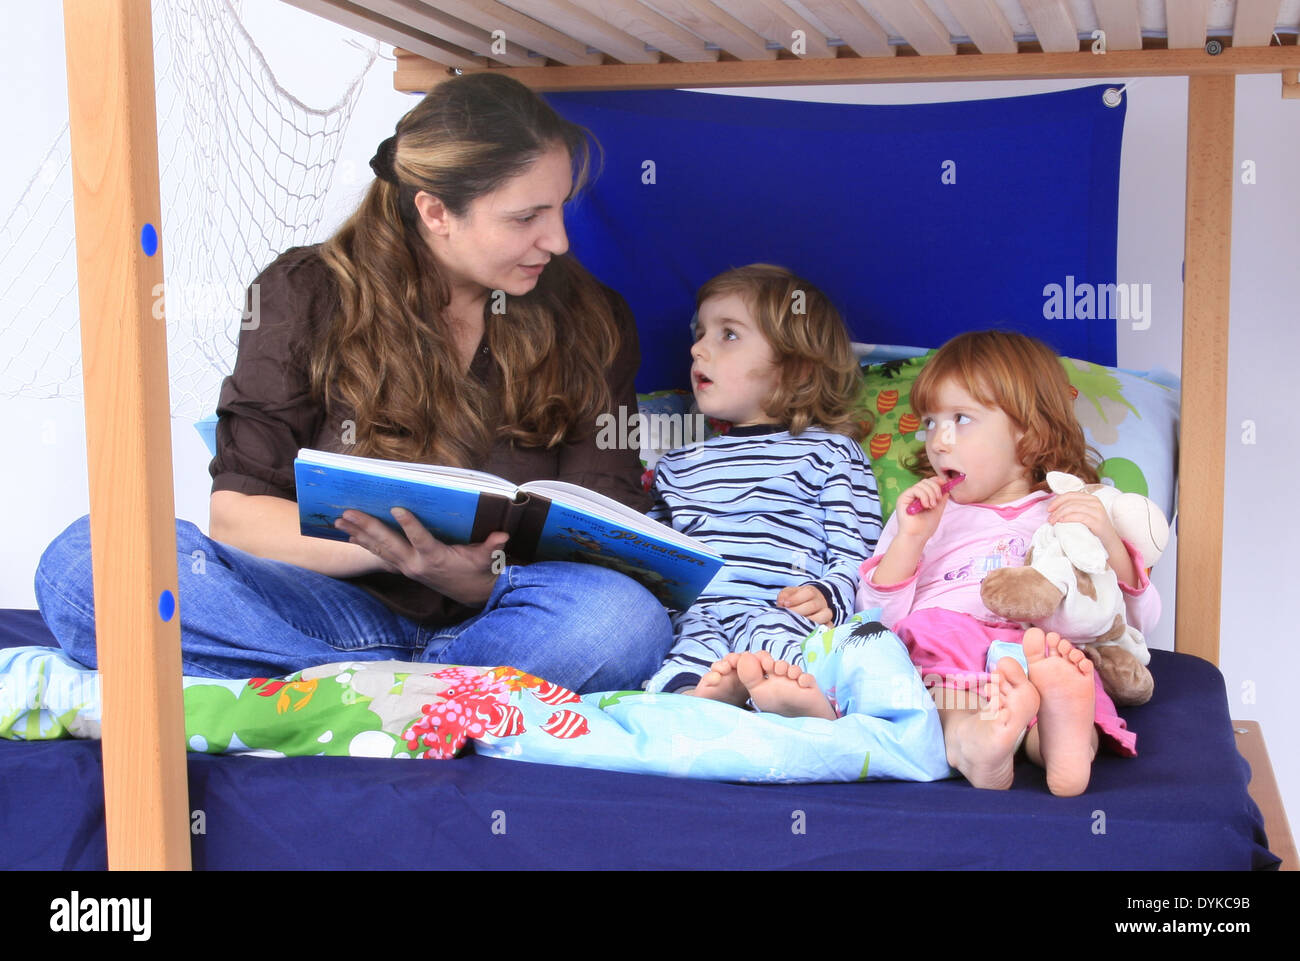 mother reading a book to her children in a Billi-Bolli loft bed, Stock Photo